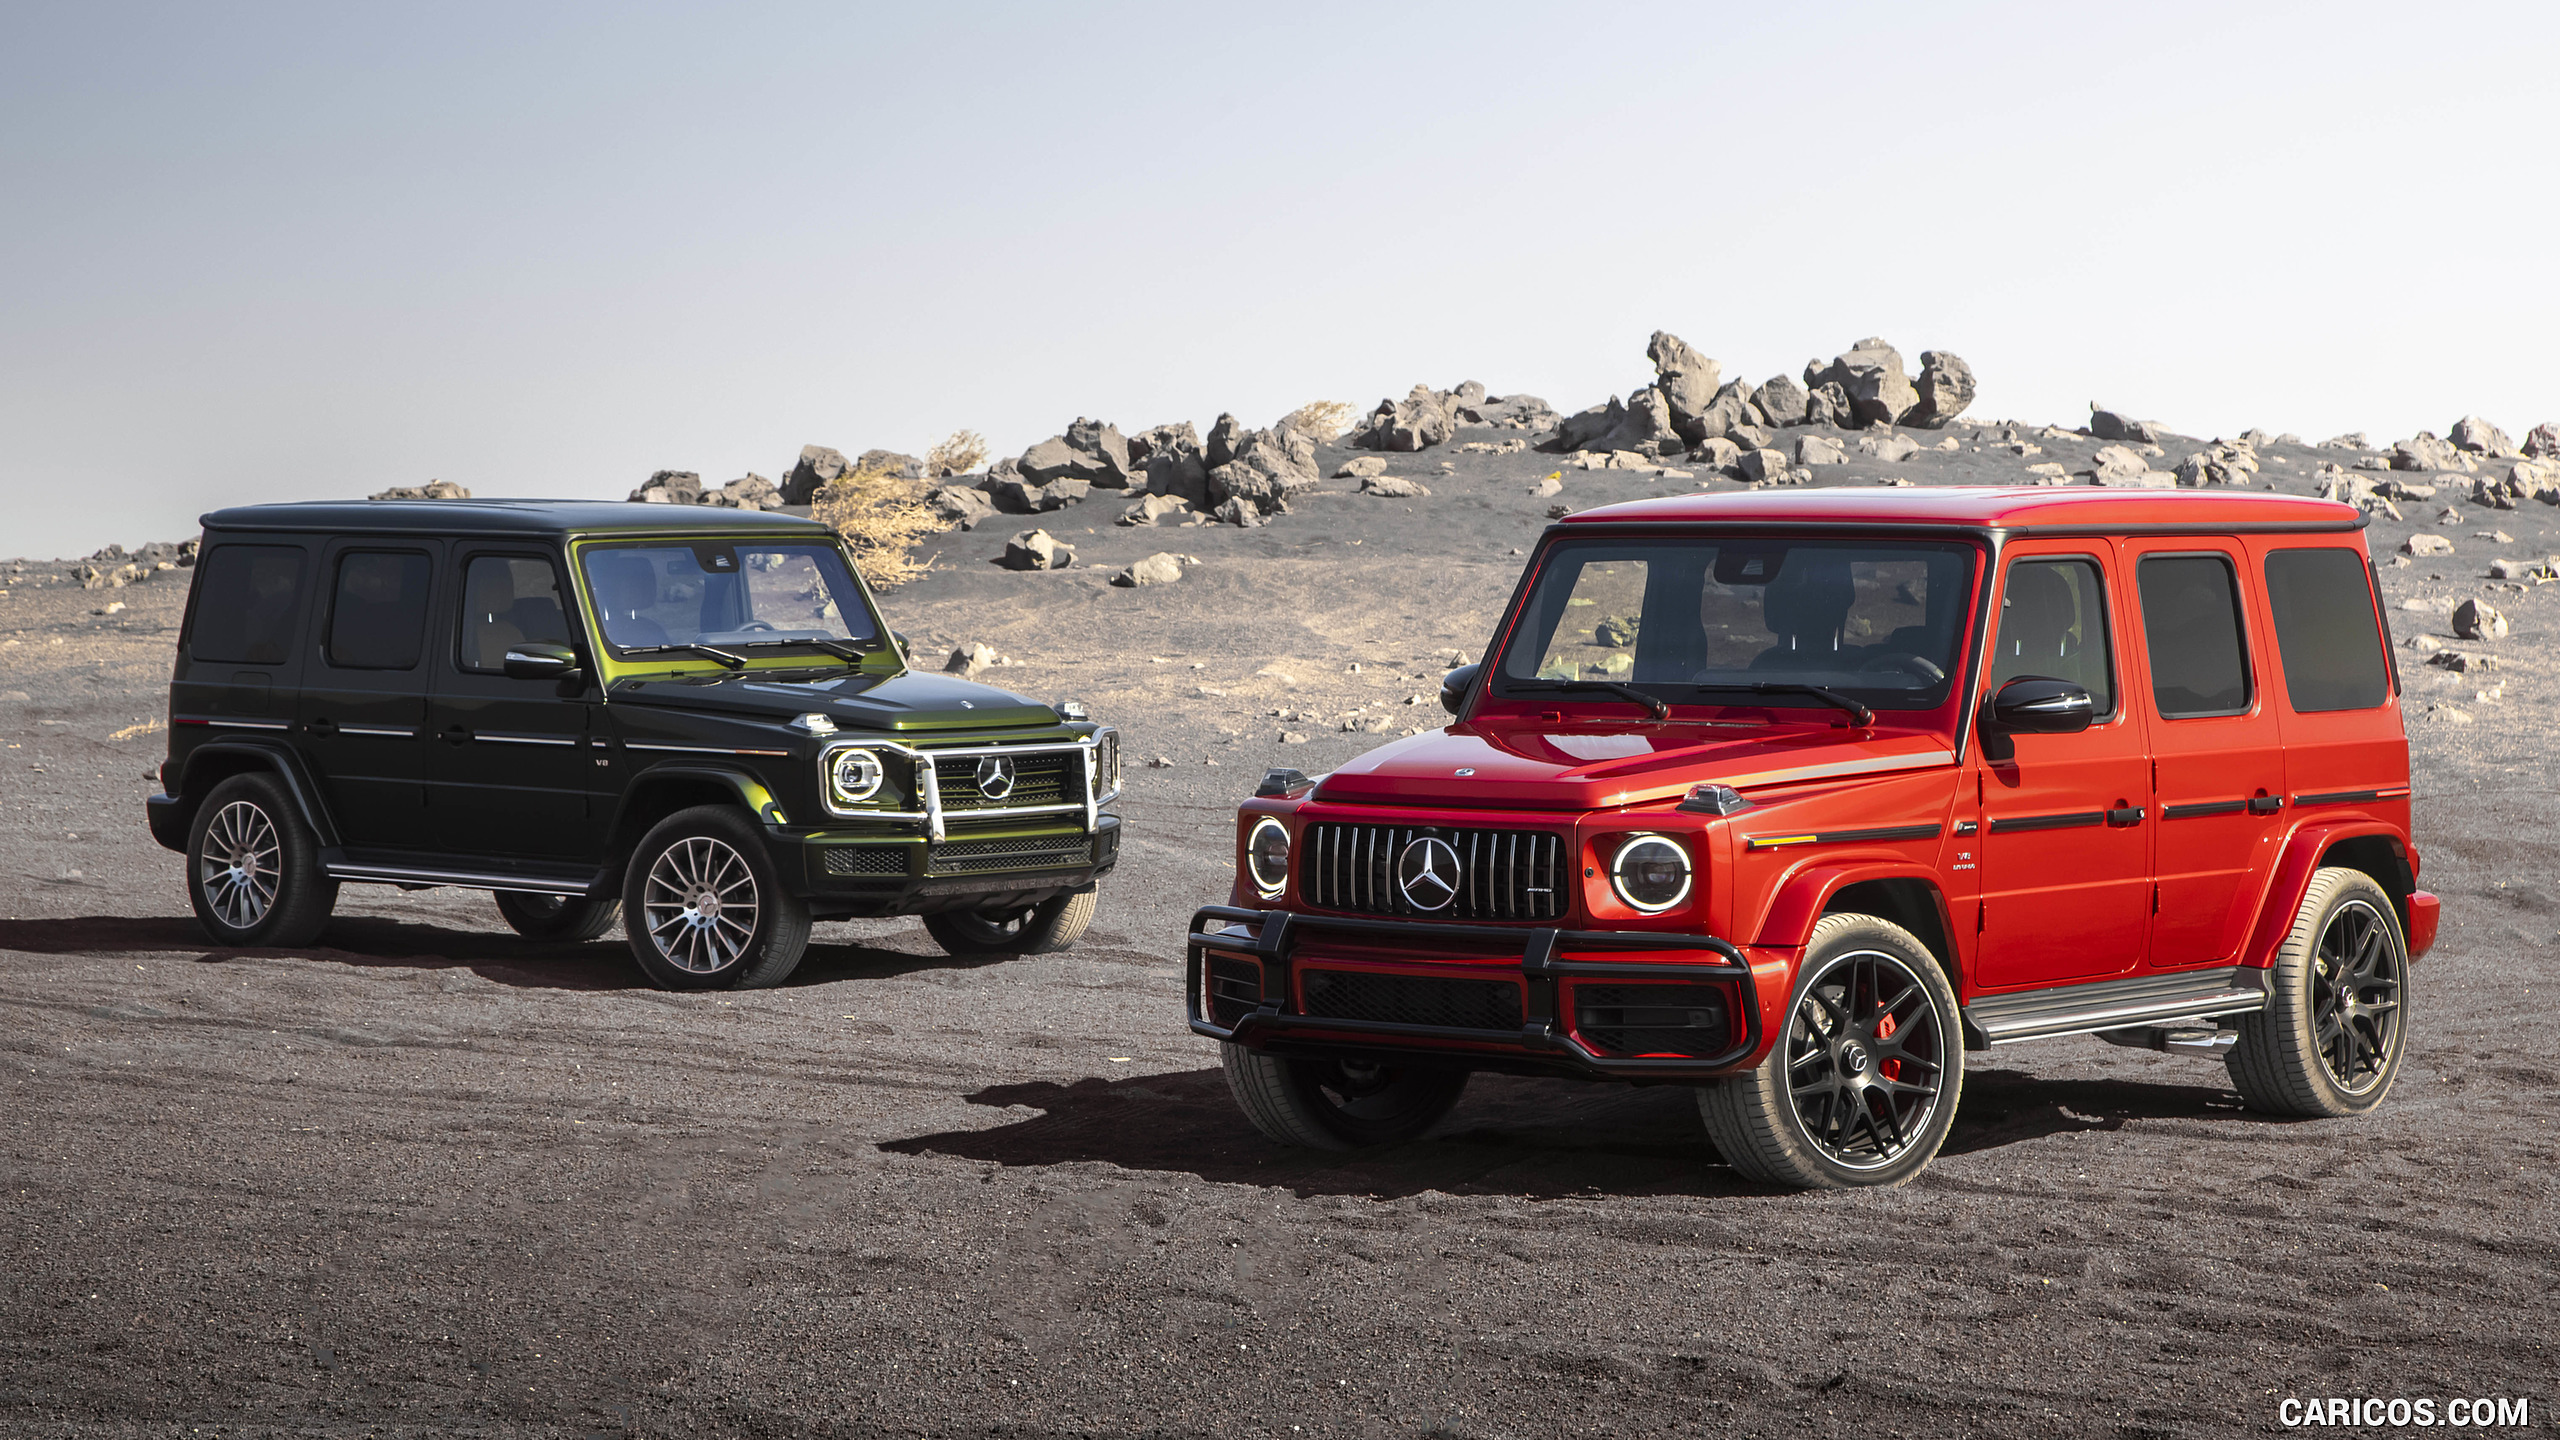 2019 Mercedes-AMG G63 (U.S.-Spec) and 2019 G550, #379 of 452